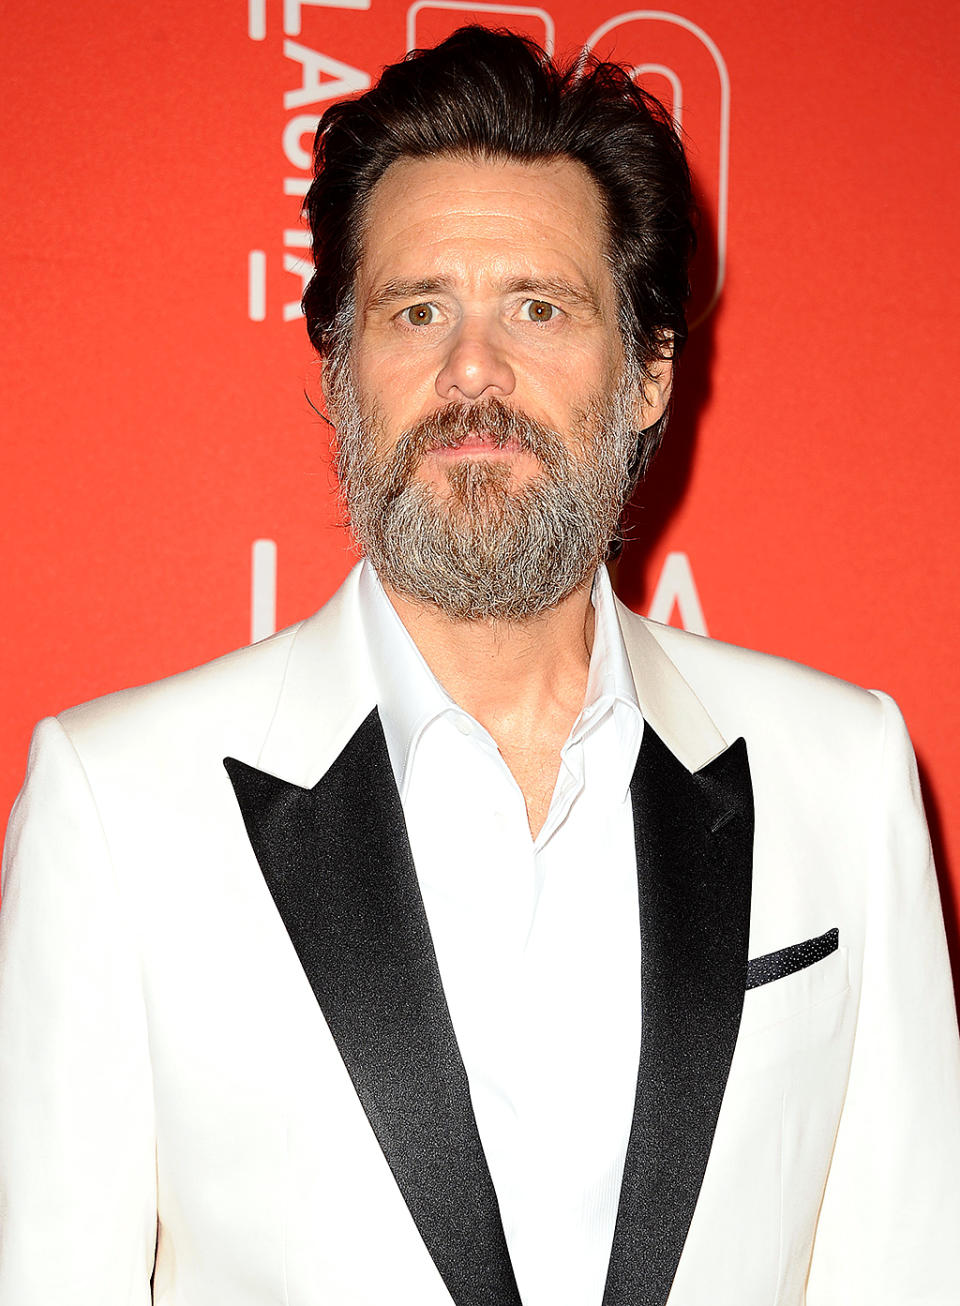 25. Jim Carrey Slapped With 2 Wrongful Death Lawsuits